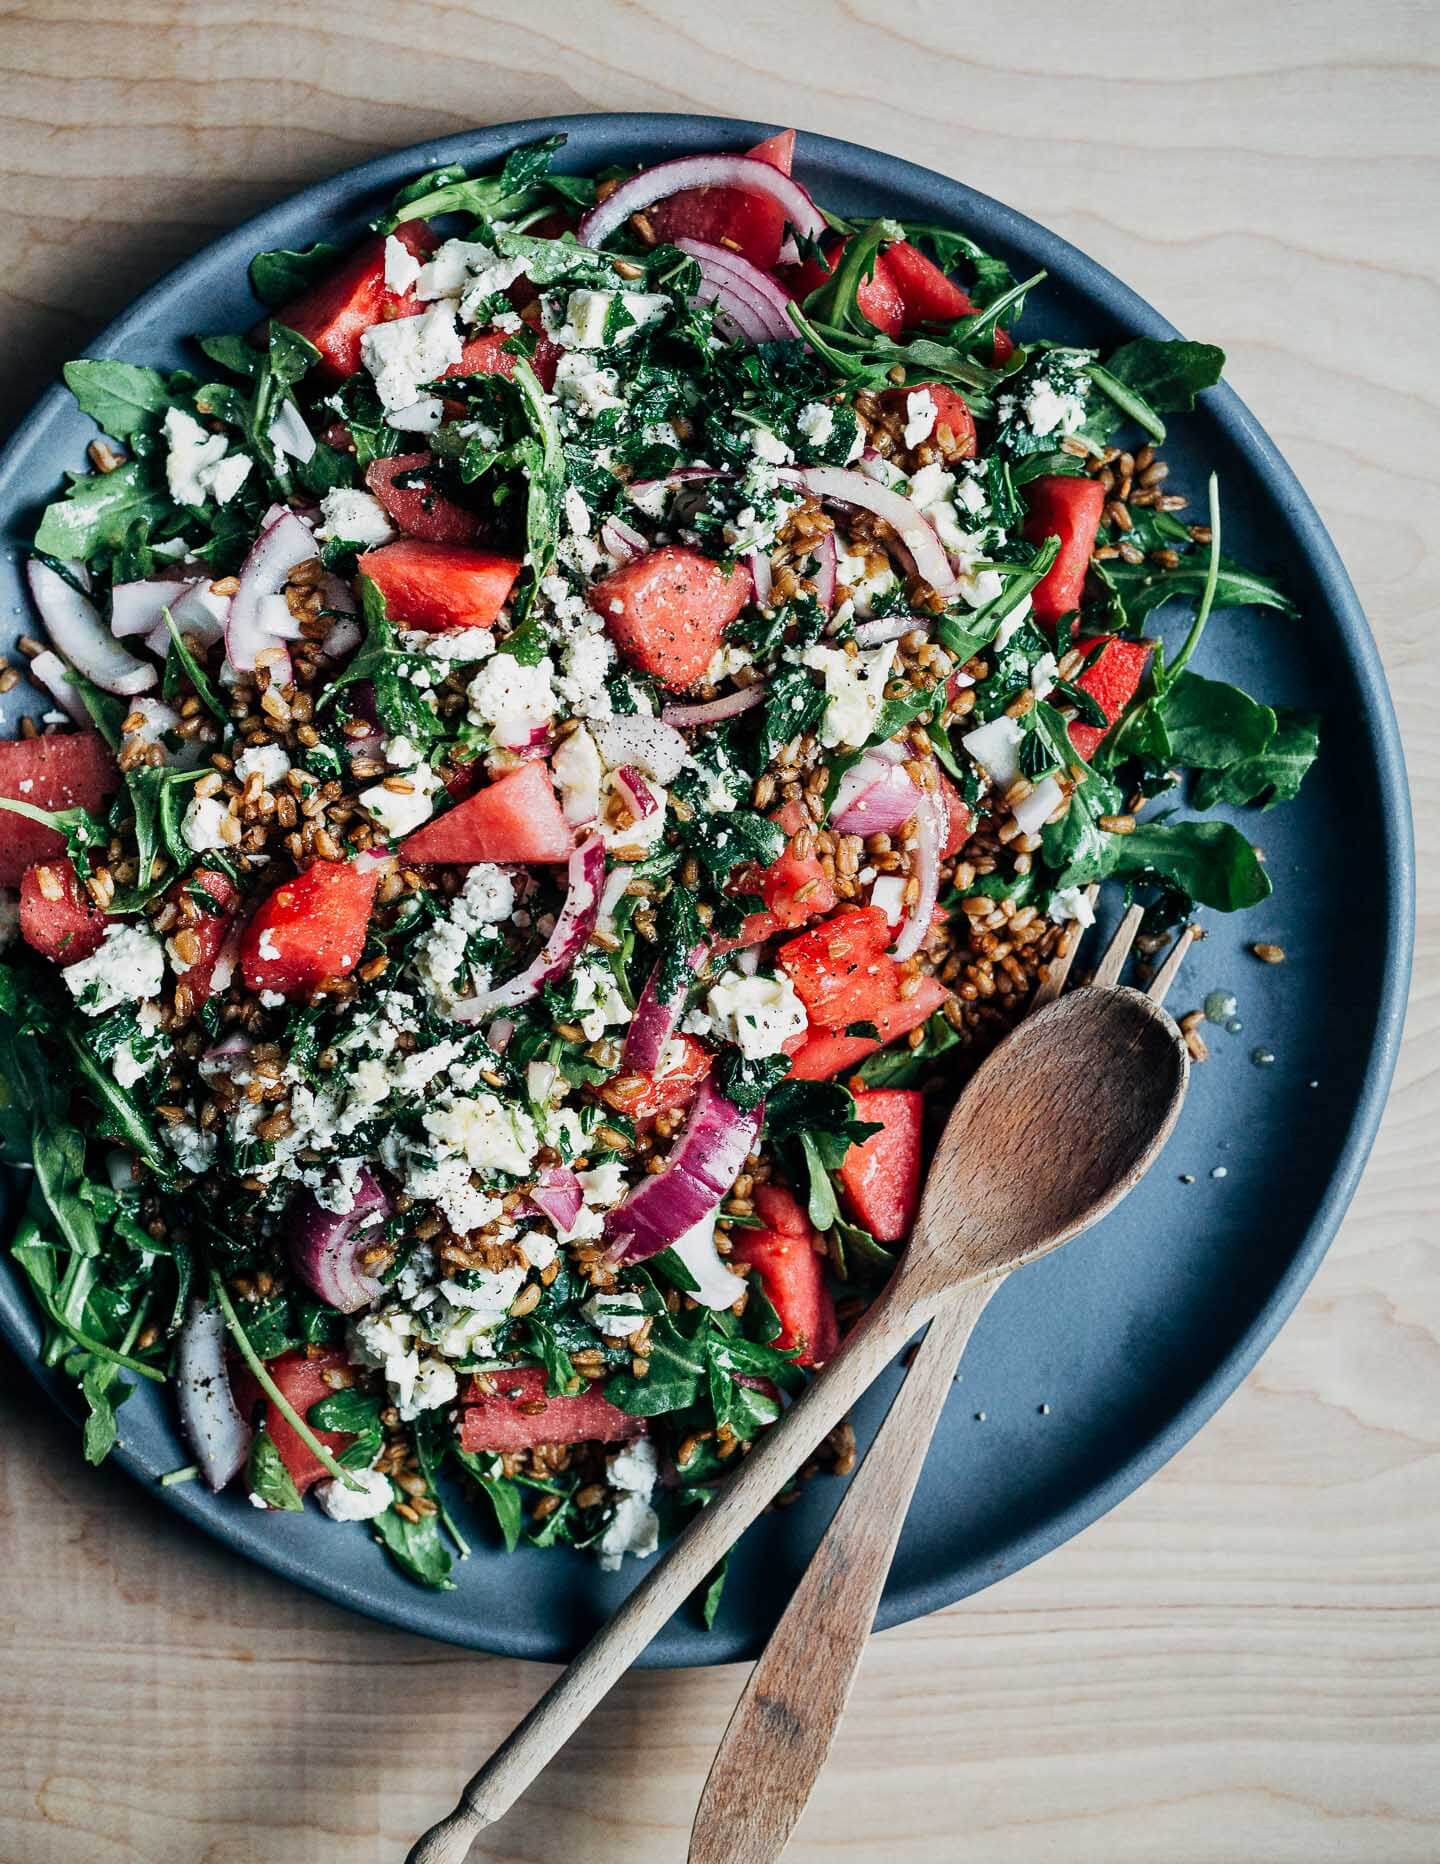 Nutty fried farro and lemony pickled red onions lend savory depth to this spin on the classic watermelon feta salad.